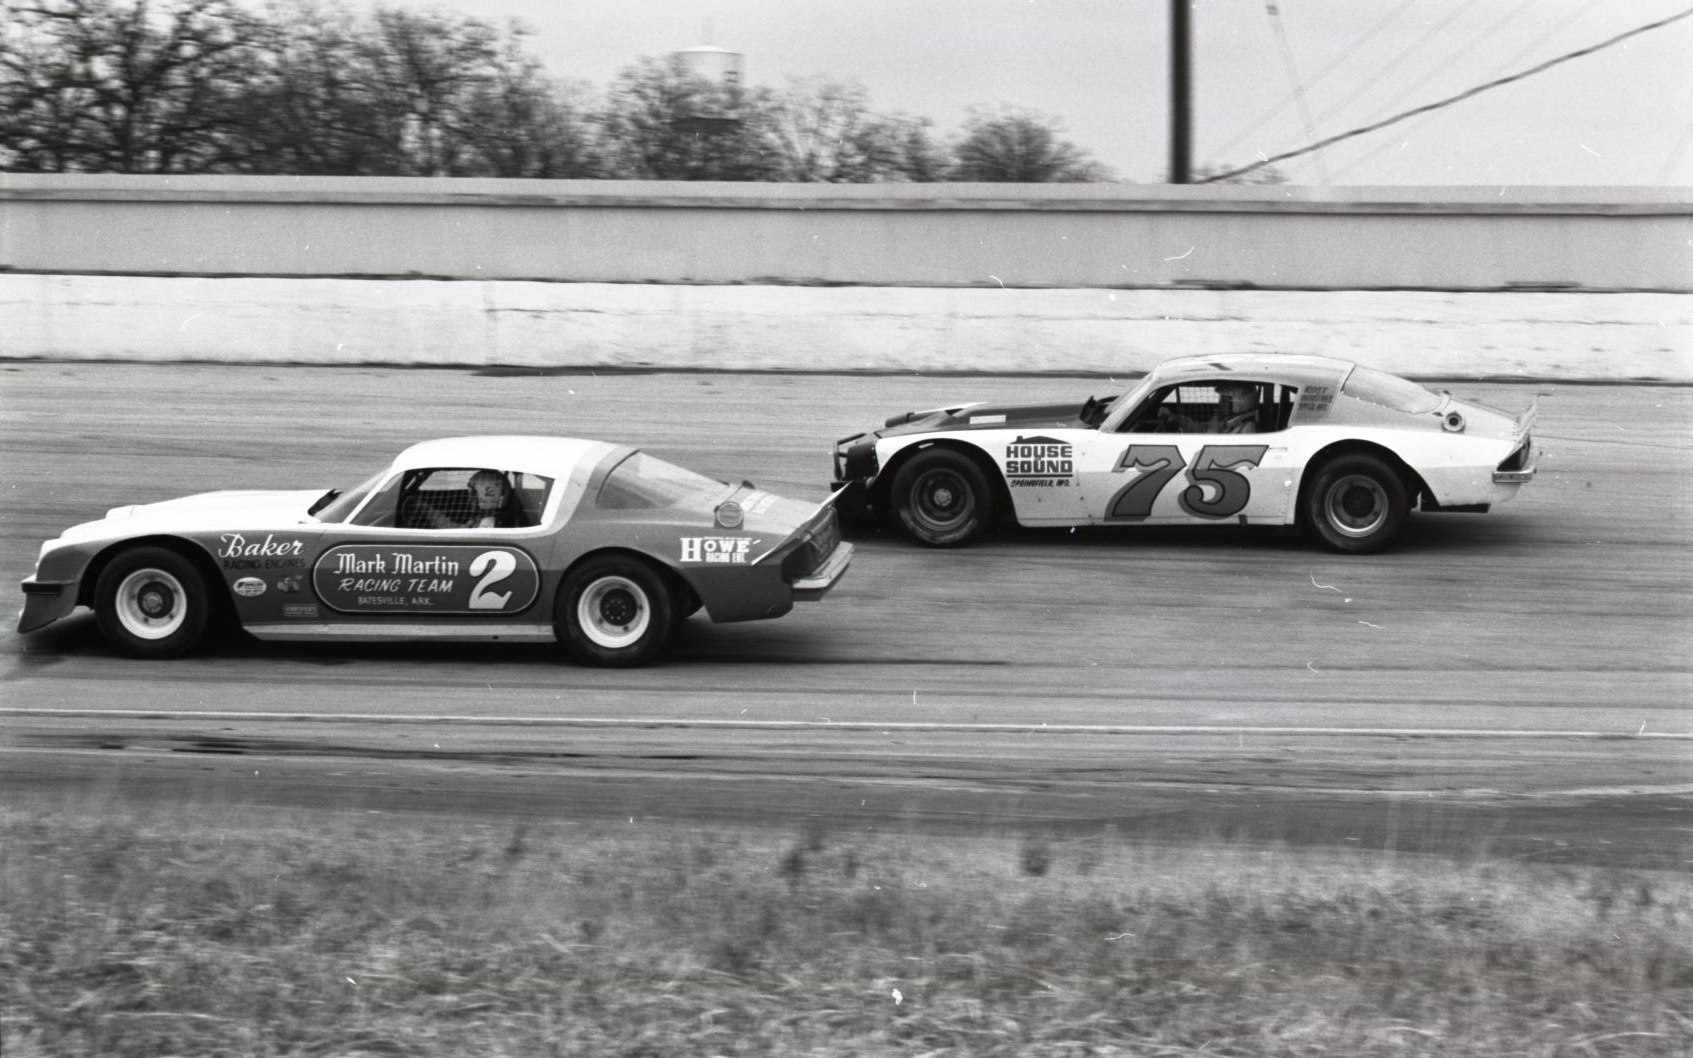 Black-and-white photo of two race cars speeding down a track